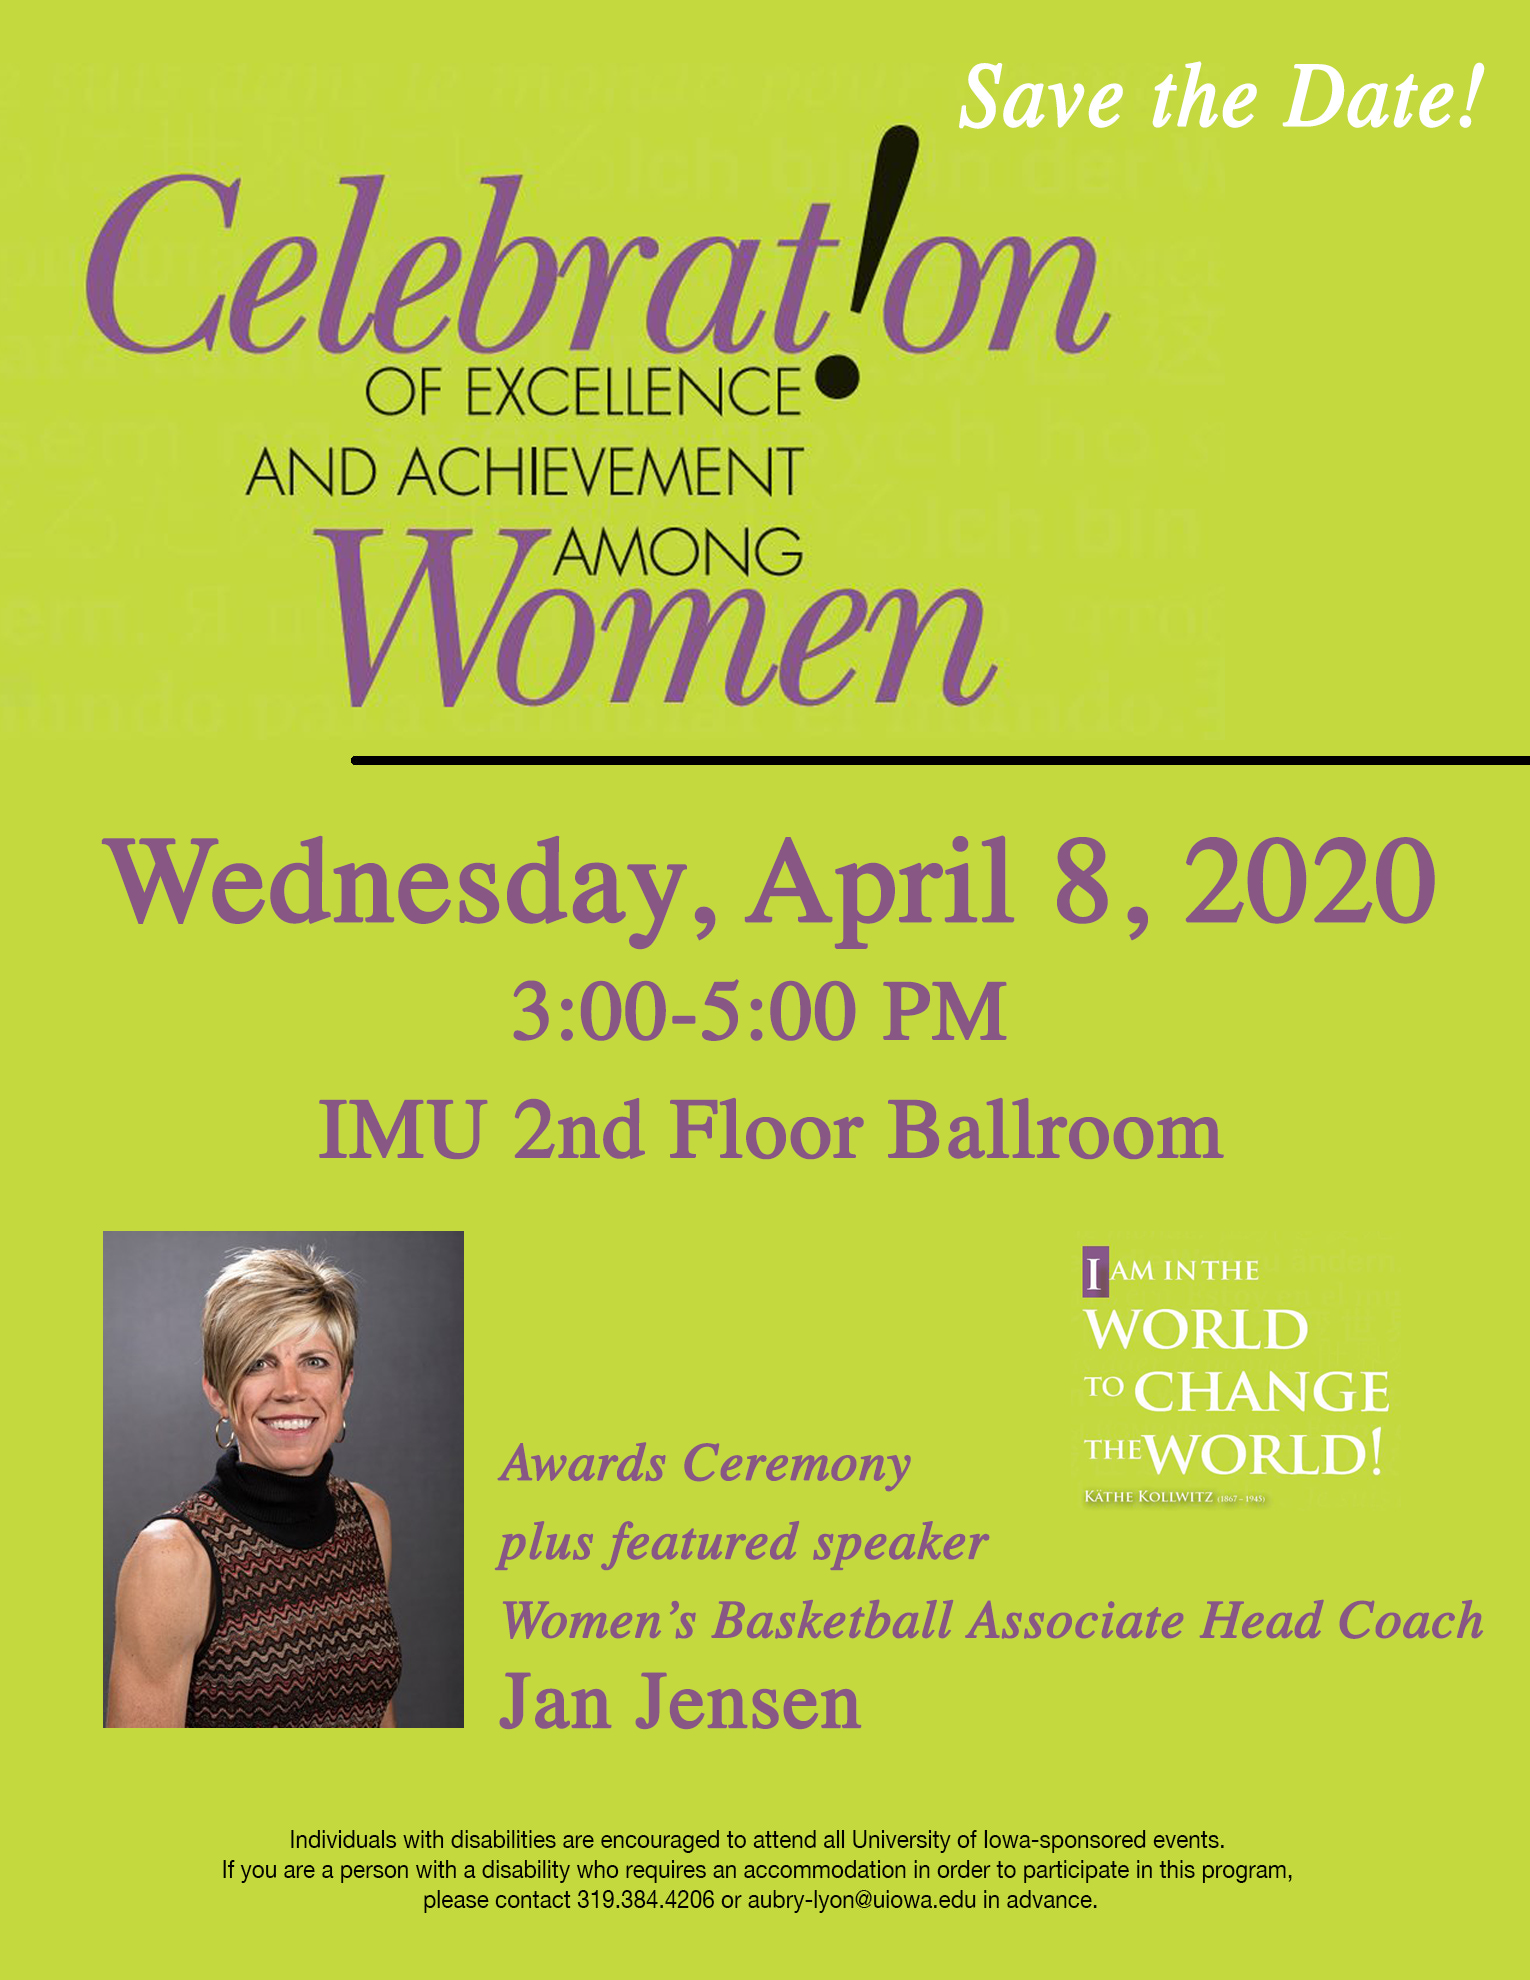 Annual Celebration of Excellence and Achievement Among Women Celebration (CEAAW) promotional image